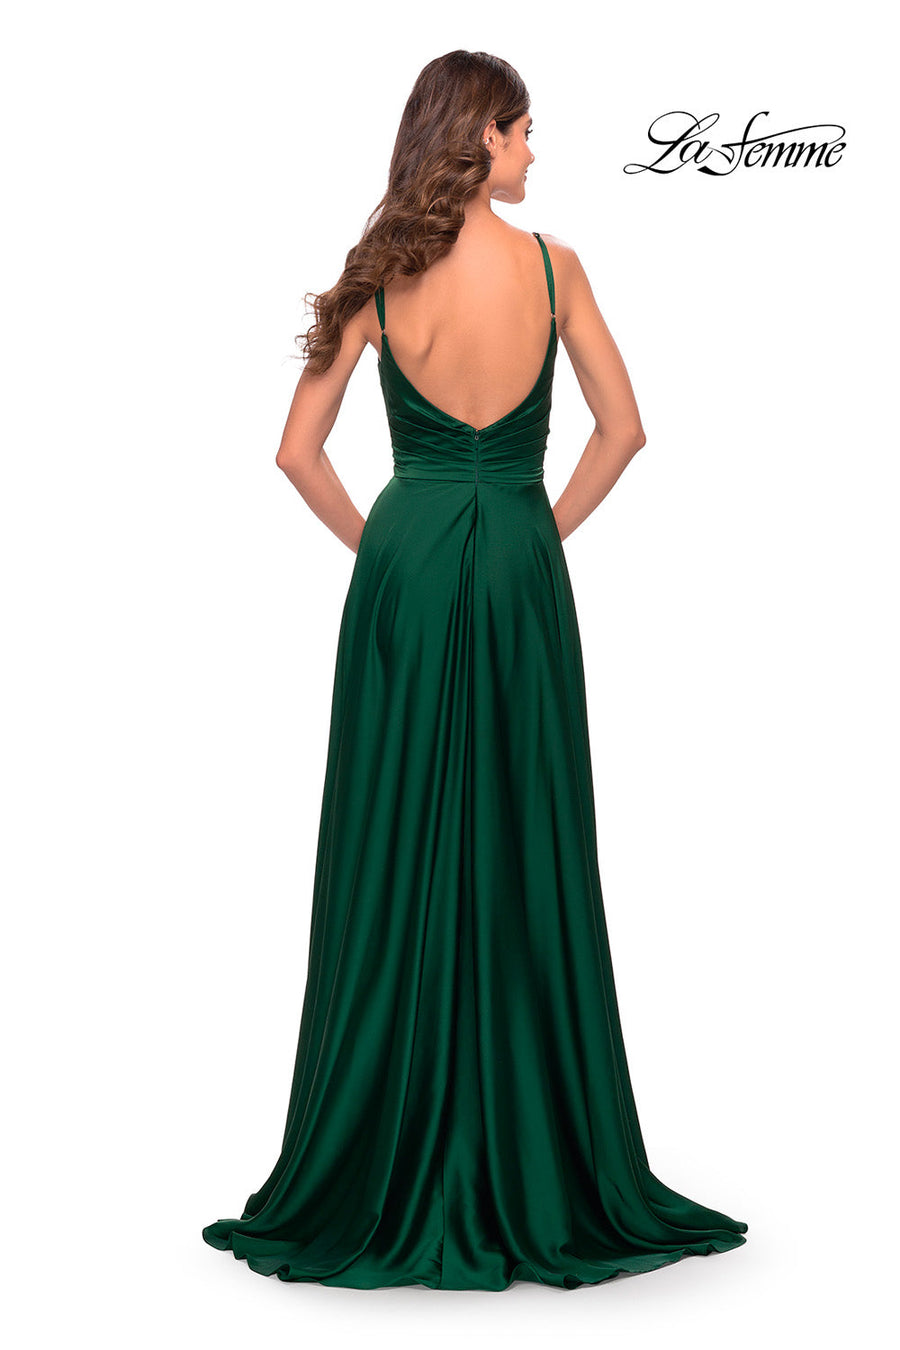 La Femme 31233 prom dress images.  La Femme 31233 is available in these colors: Emerald, Navy, Wine.